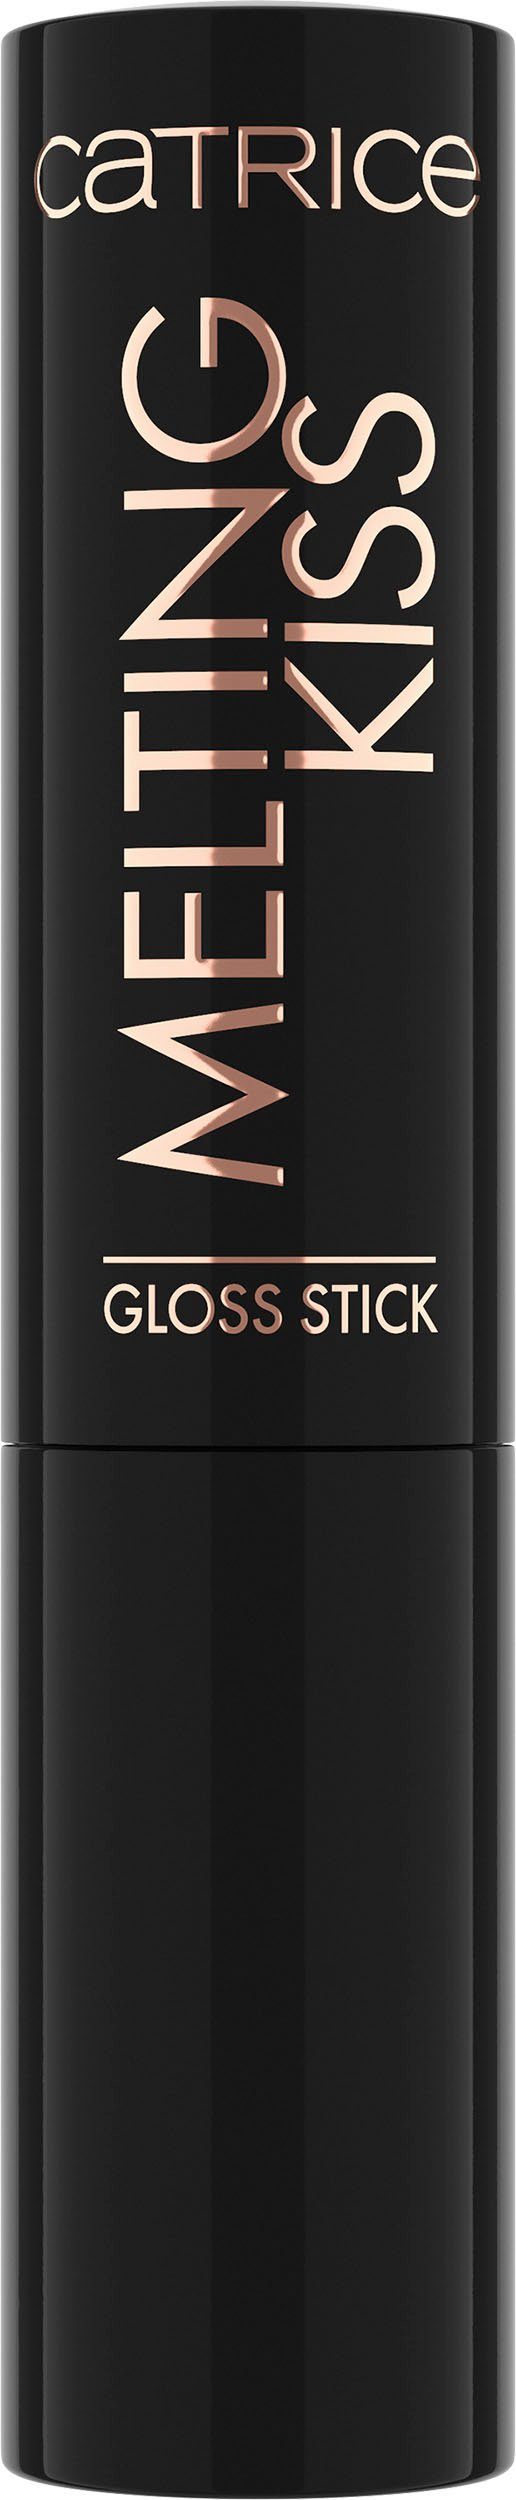 Catrice connection Gloss Lippenstift strong Kiss Stick, Catrice 3-tlg. Melting